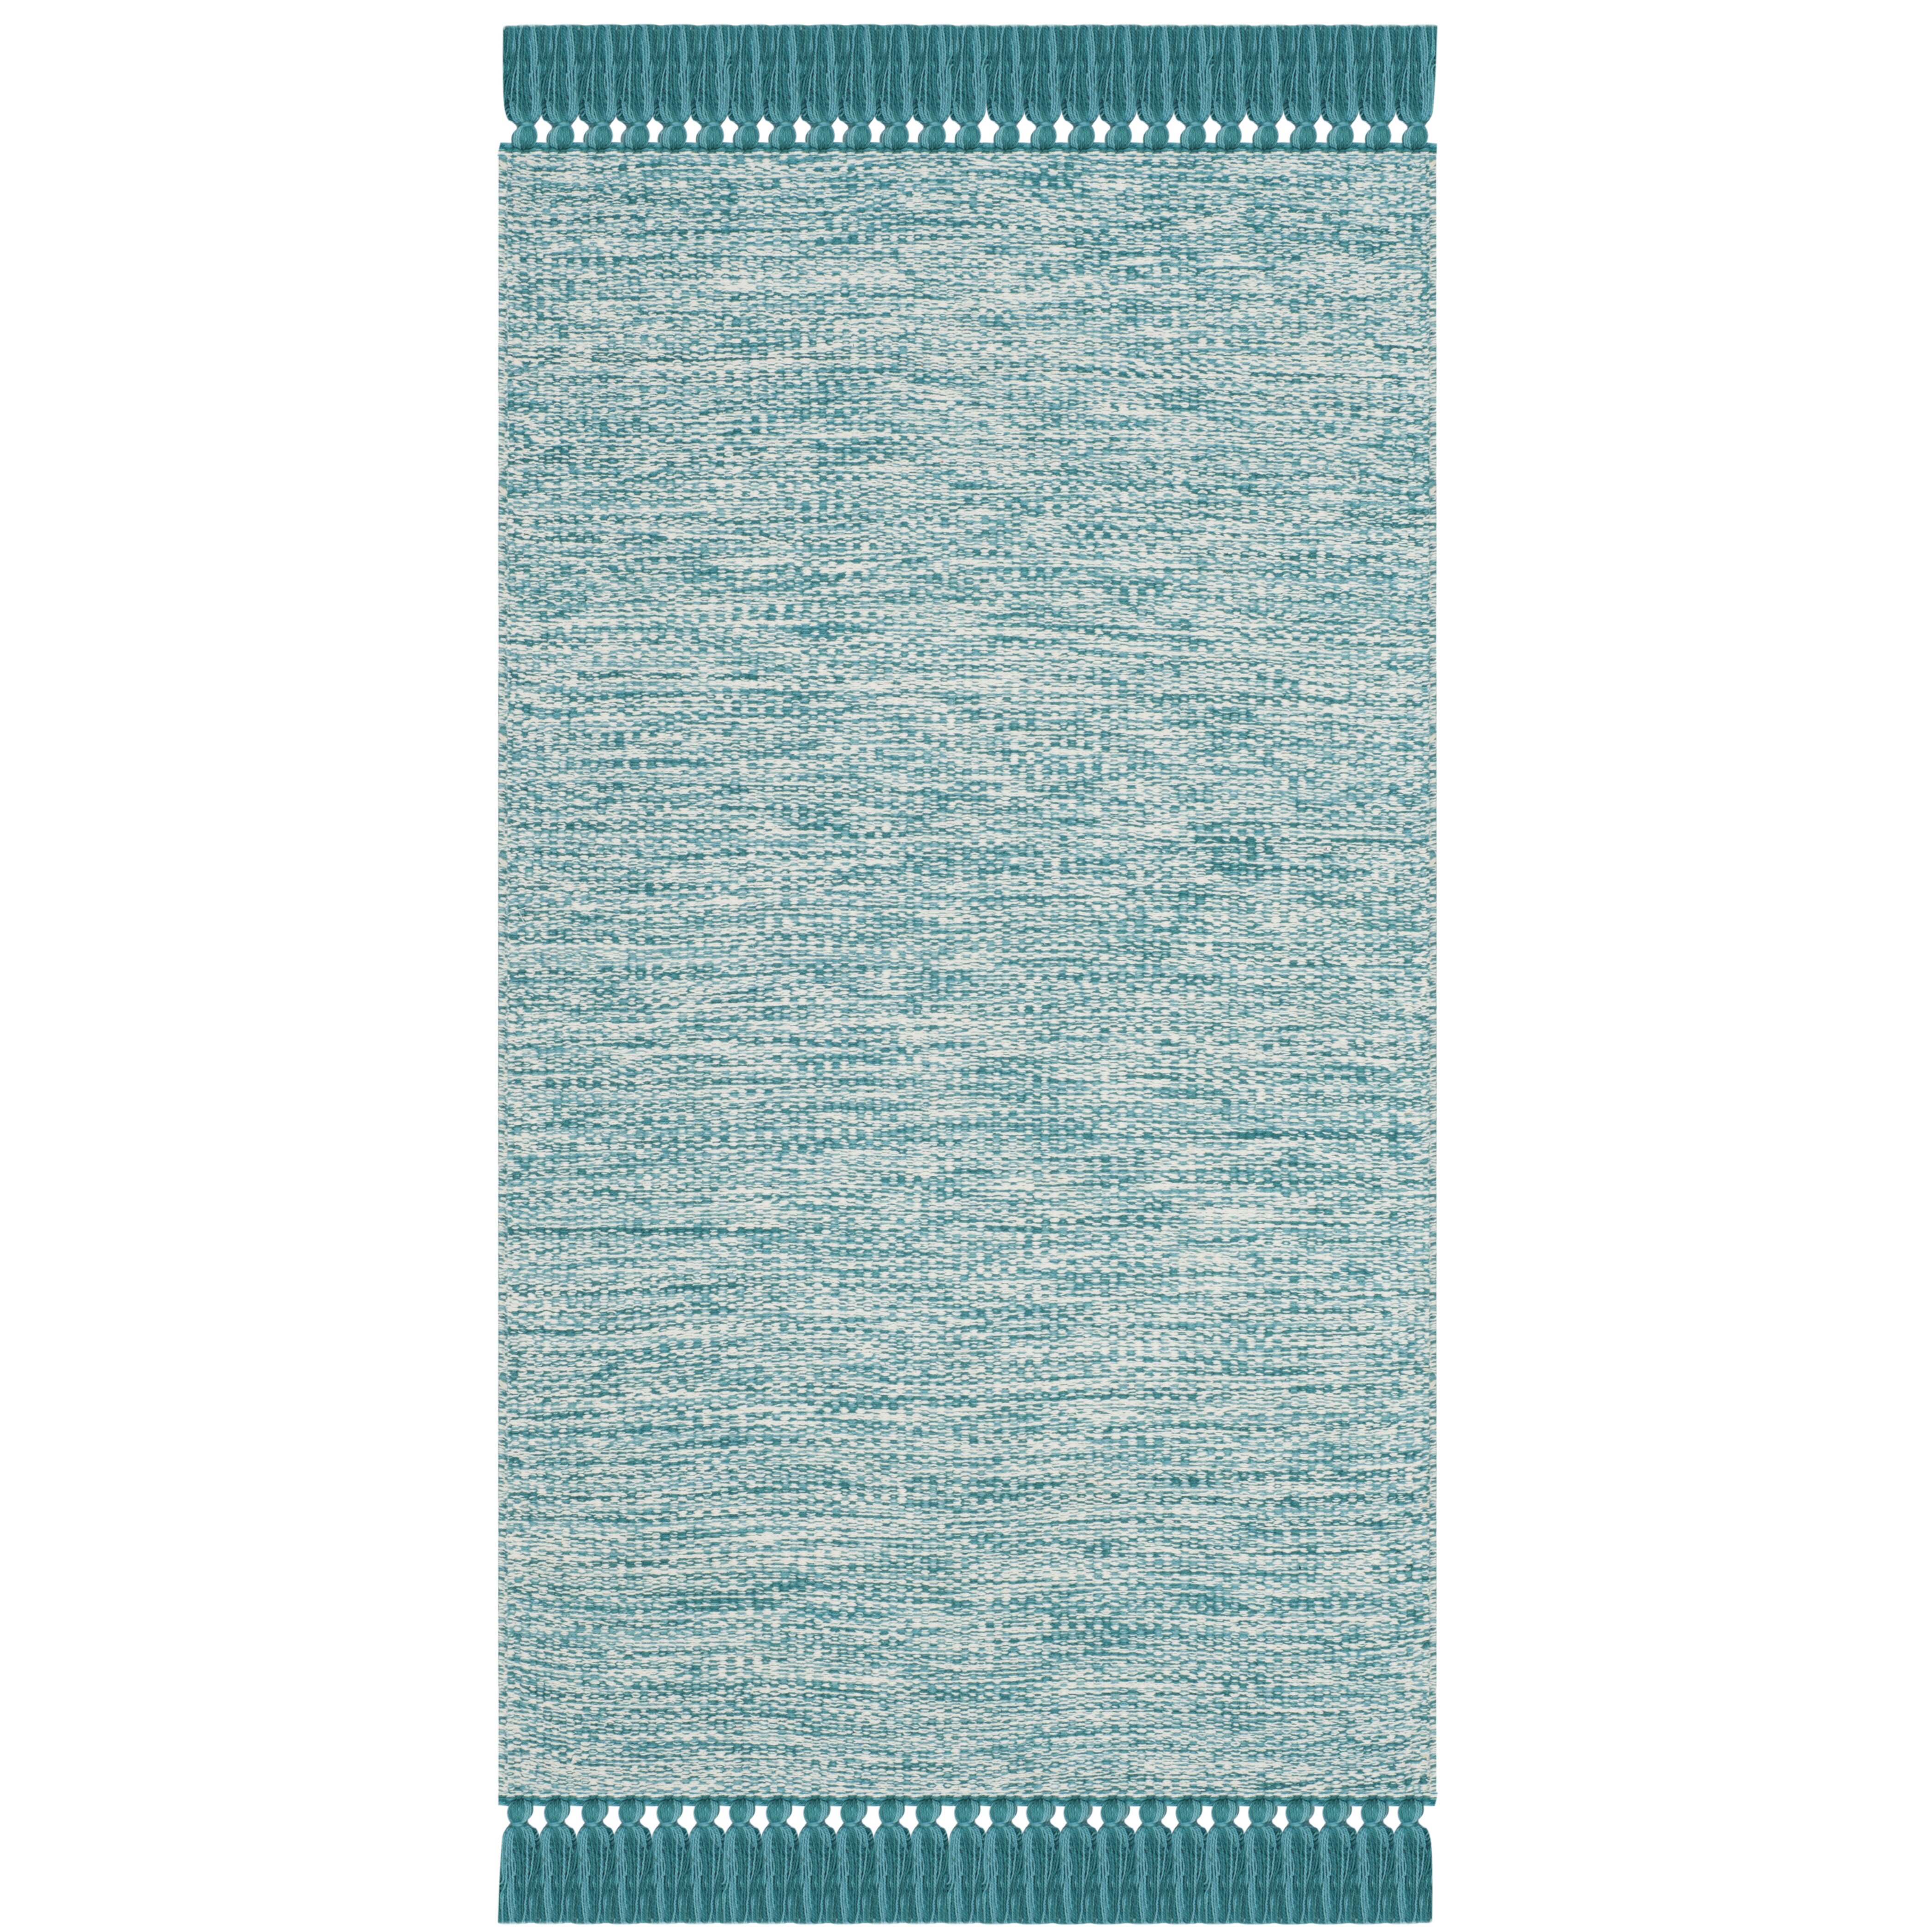 Clare Hand-Woven Turquoise/Gray Area Rug | AllModern - Viv + Rae Clare Hand-Woven Turquoise/Gray Area Rug